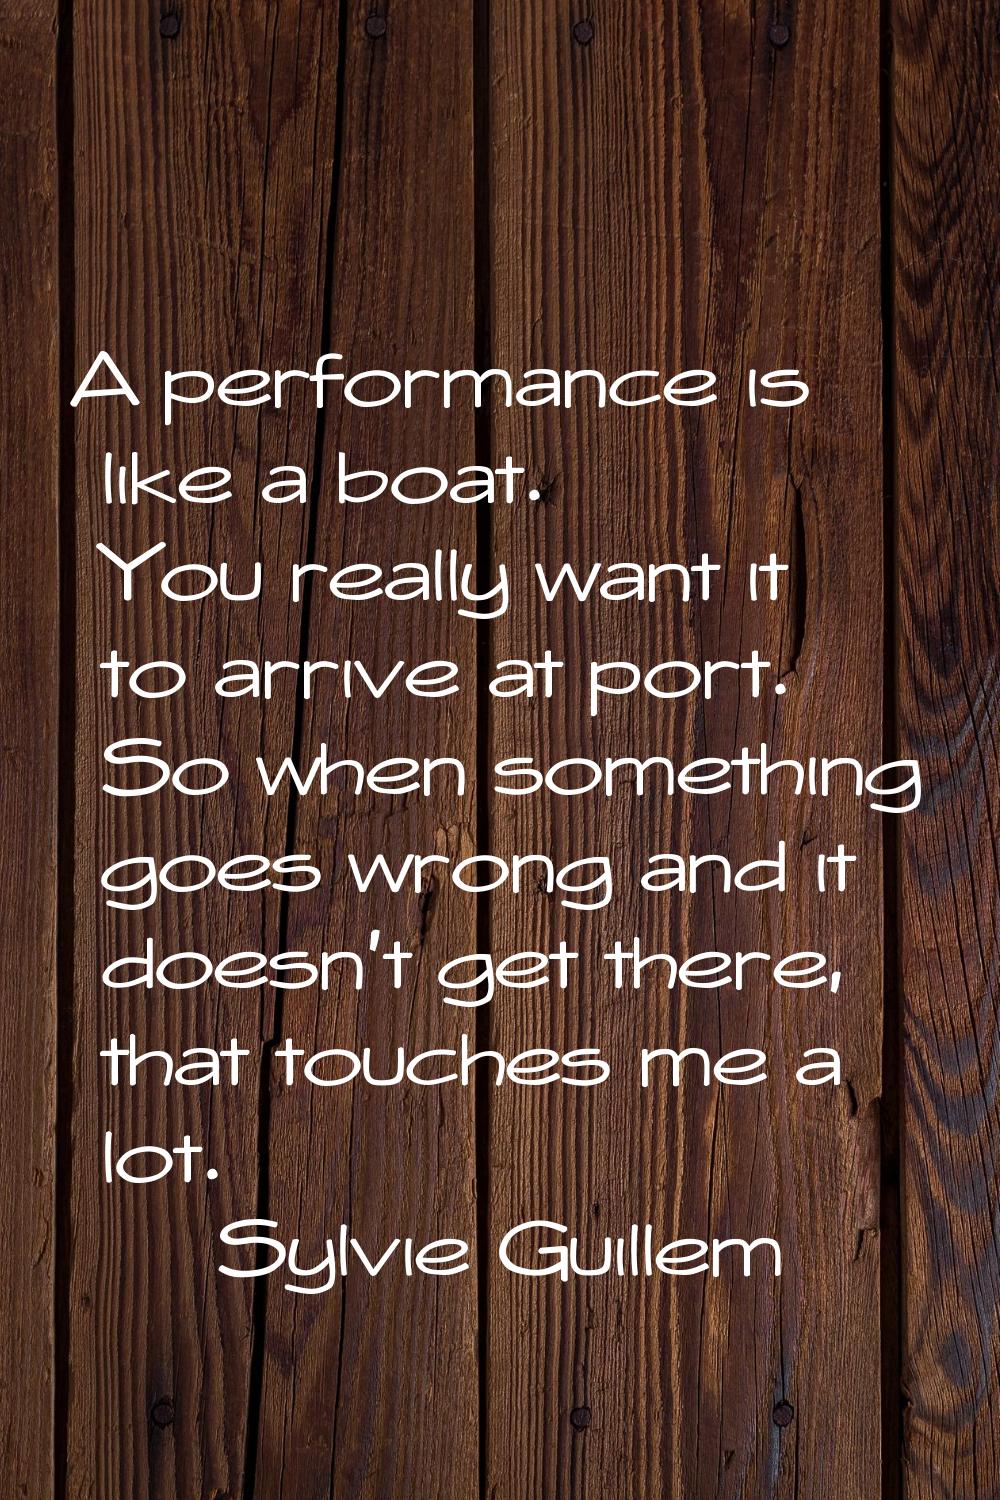 A performance is like a boat. You really want it to arrive at port. So when something goes wrong an